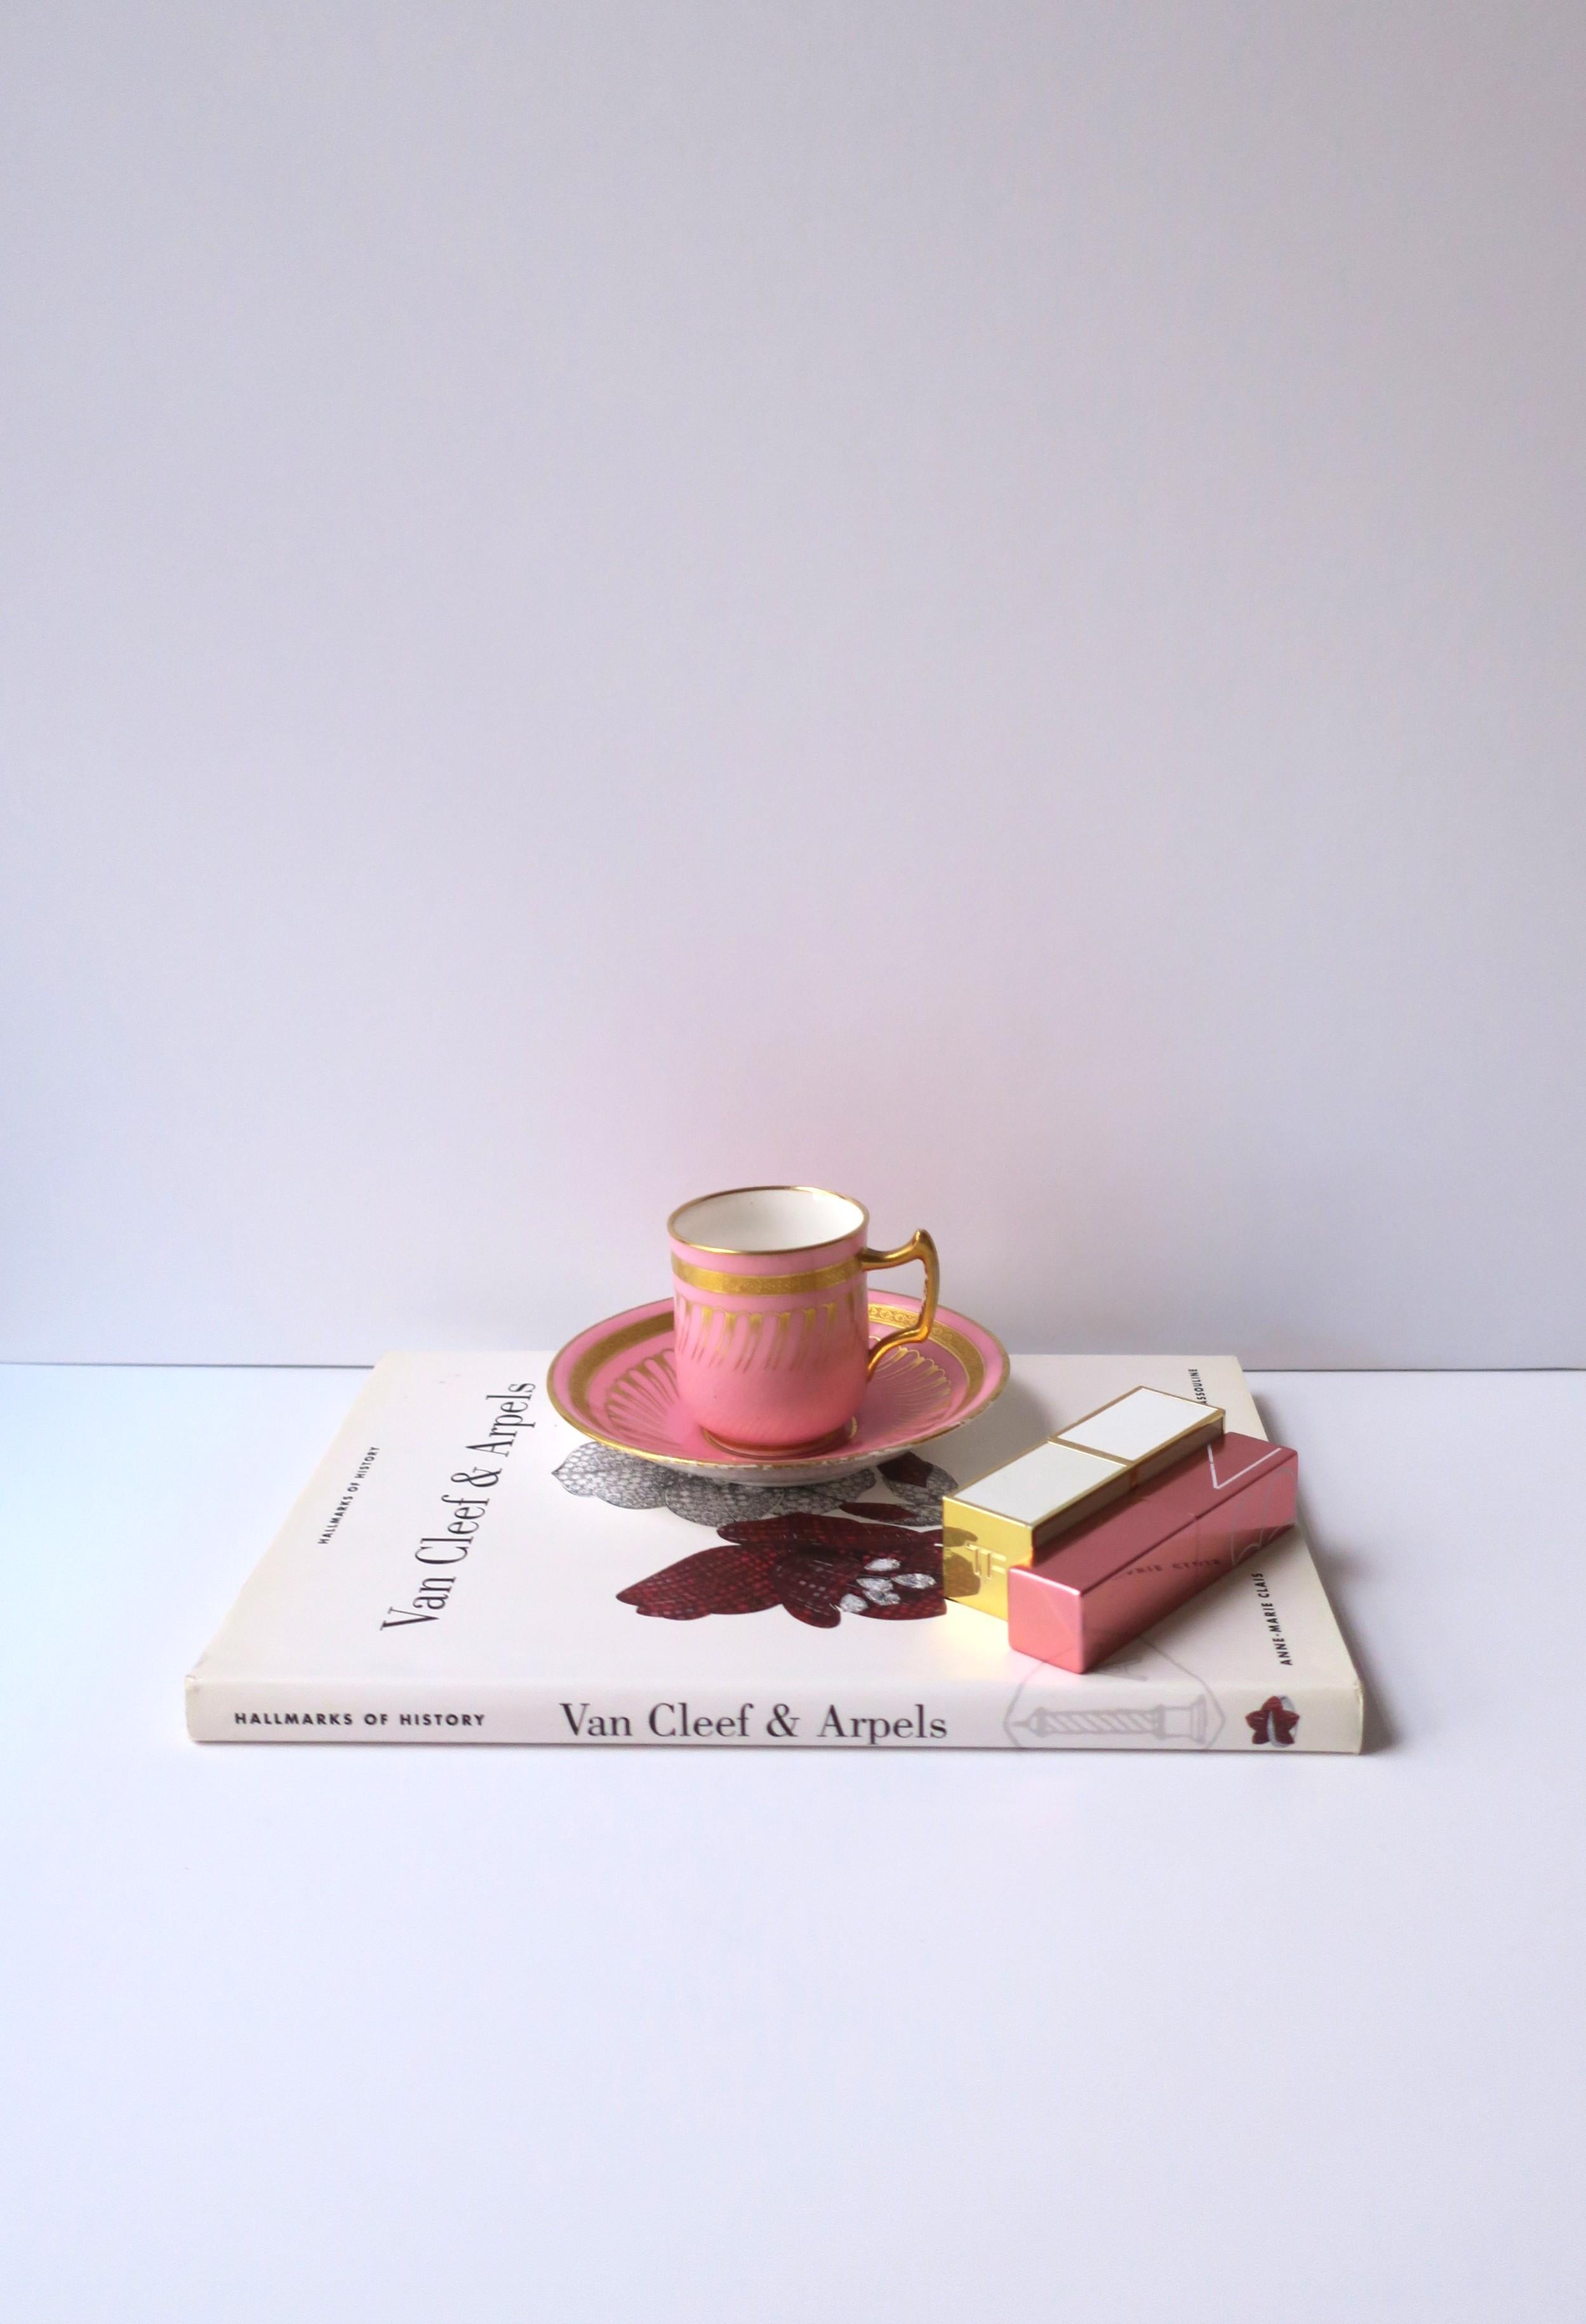 Victorian English Minton Pink & Gold Porcelain Coffee Espresso Cup & Saucer, 19th century For Sale